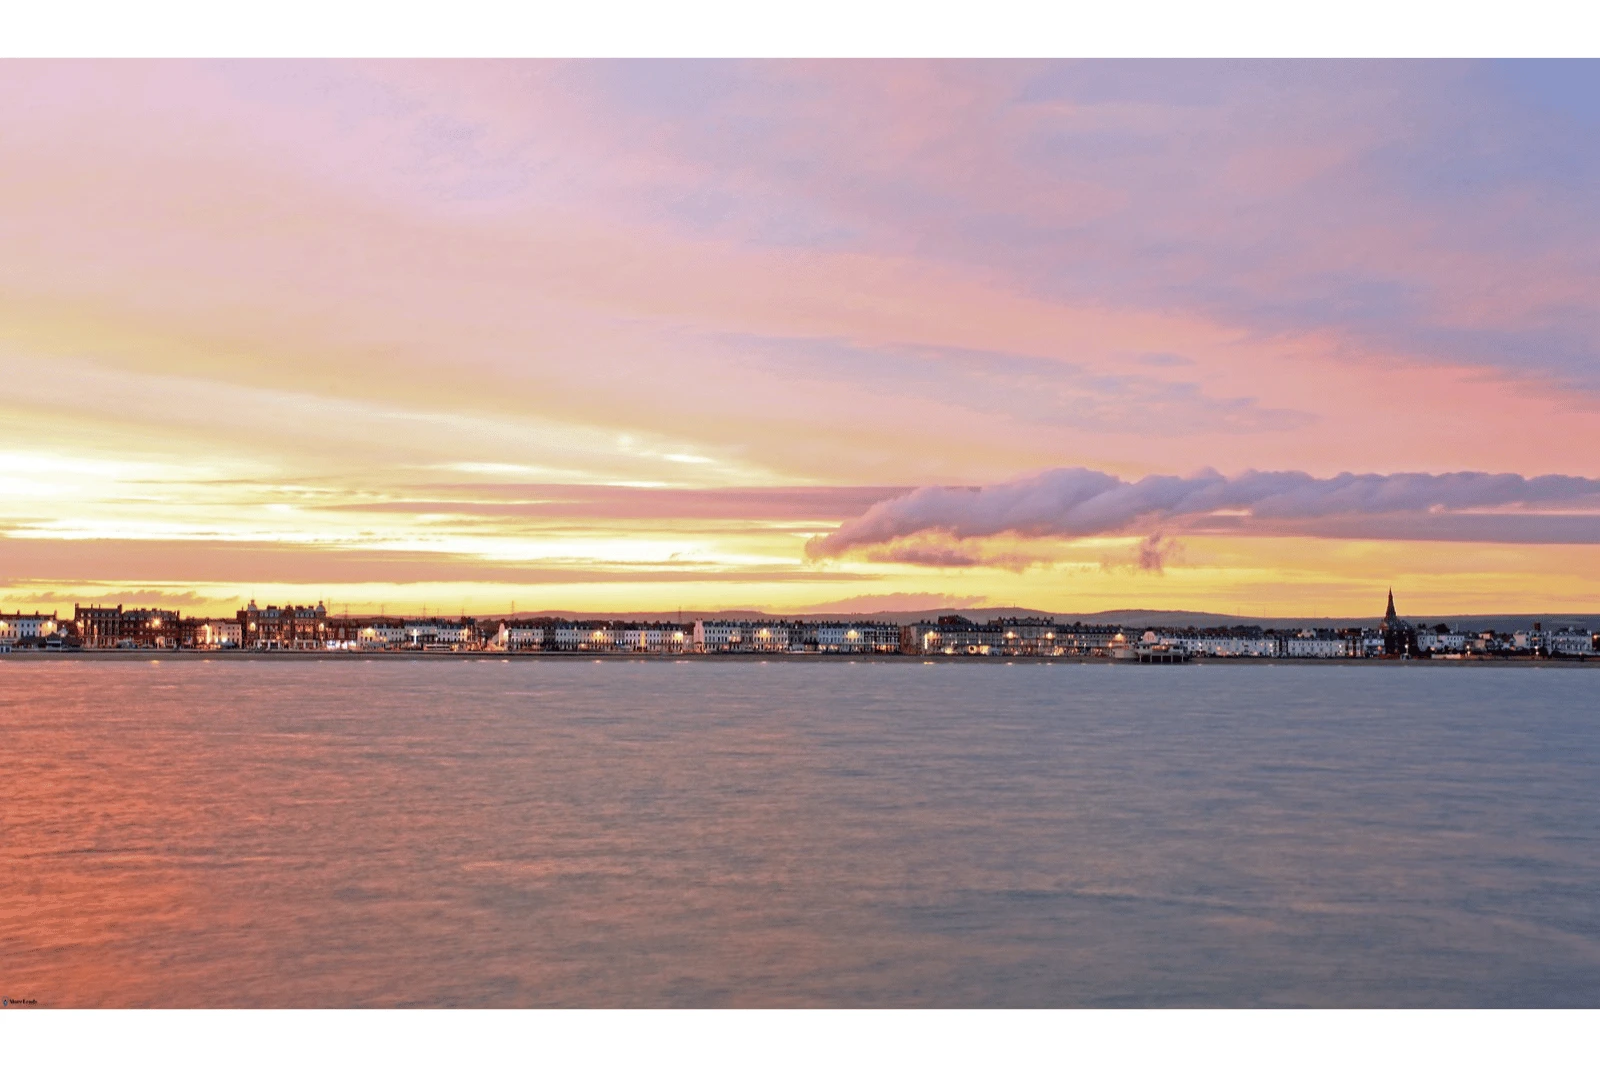 Sunset over Weymouth Seafront from out to sea. Weymouth Seafront is an competitive area for businesses.